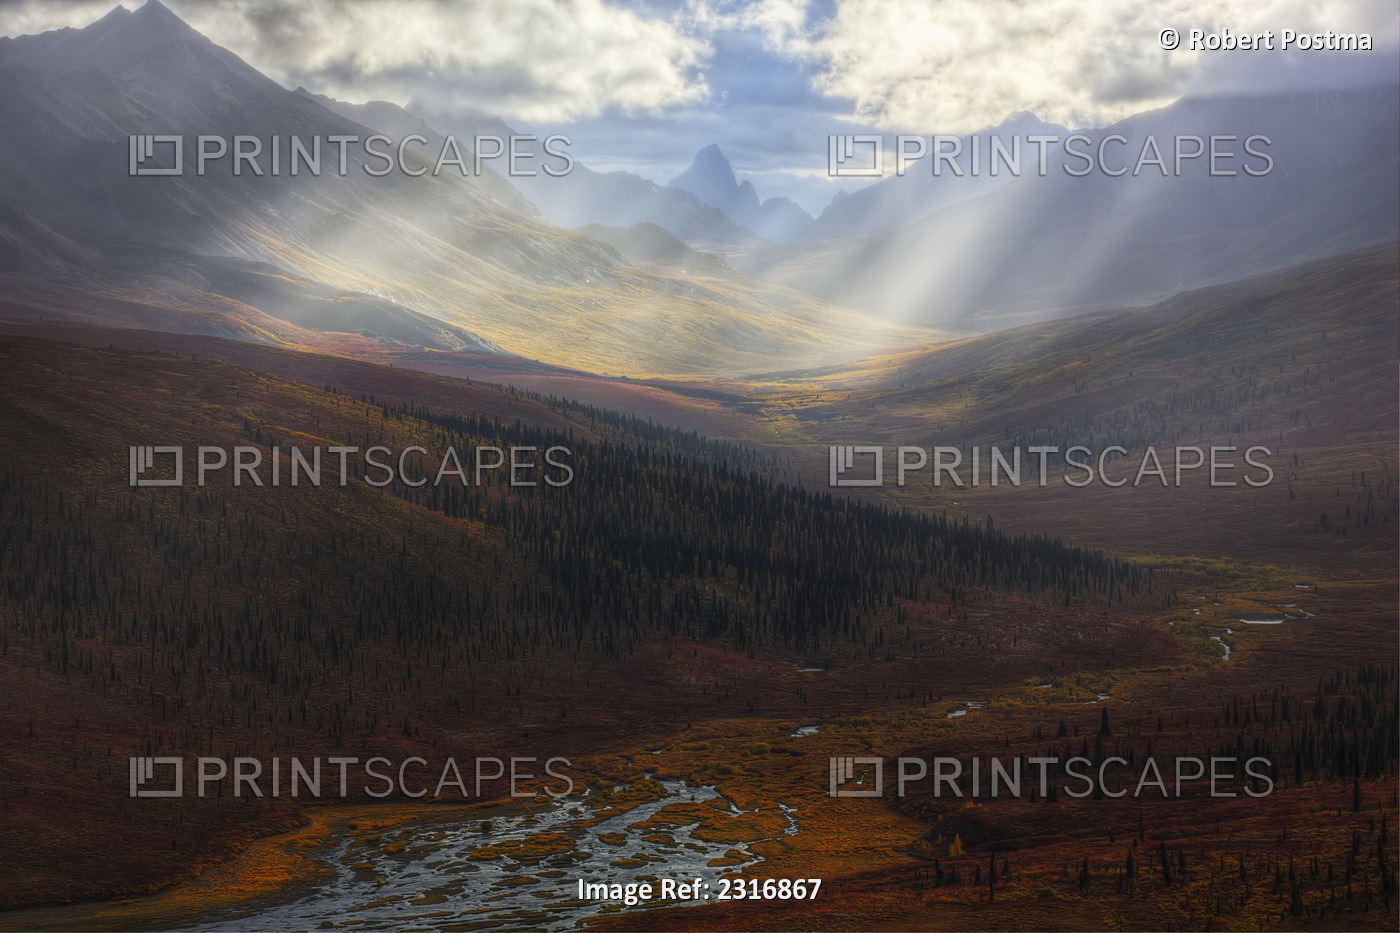 Shafts Of Sunlight Shine Over The Colors Of Autumn In Klondike Valley Of ...